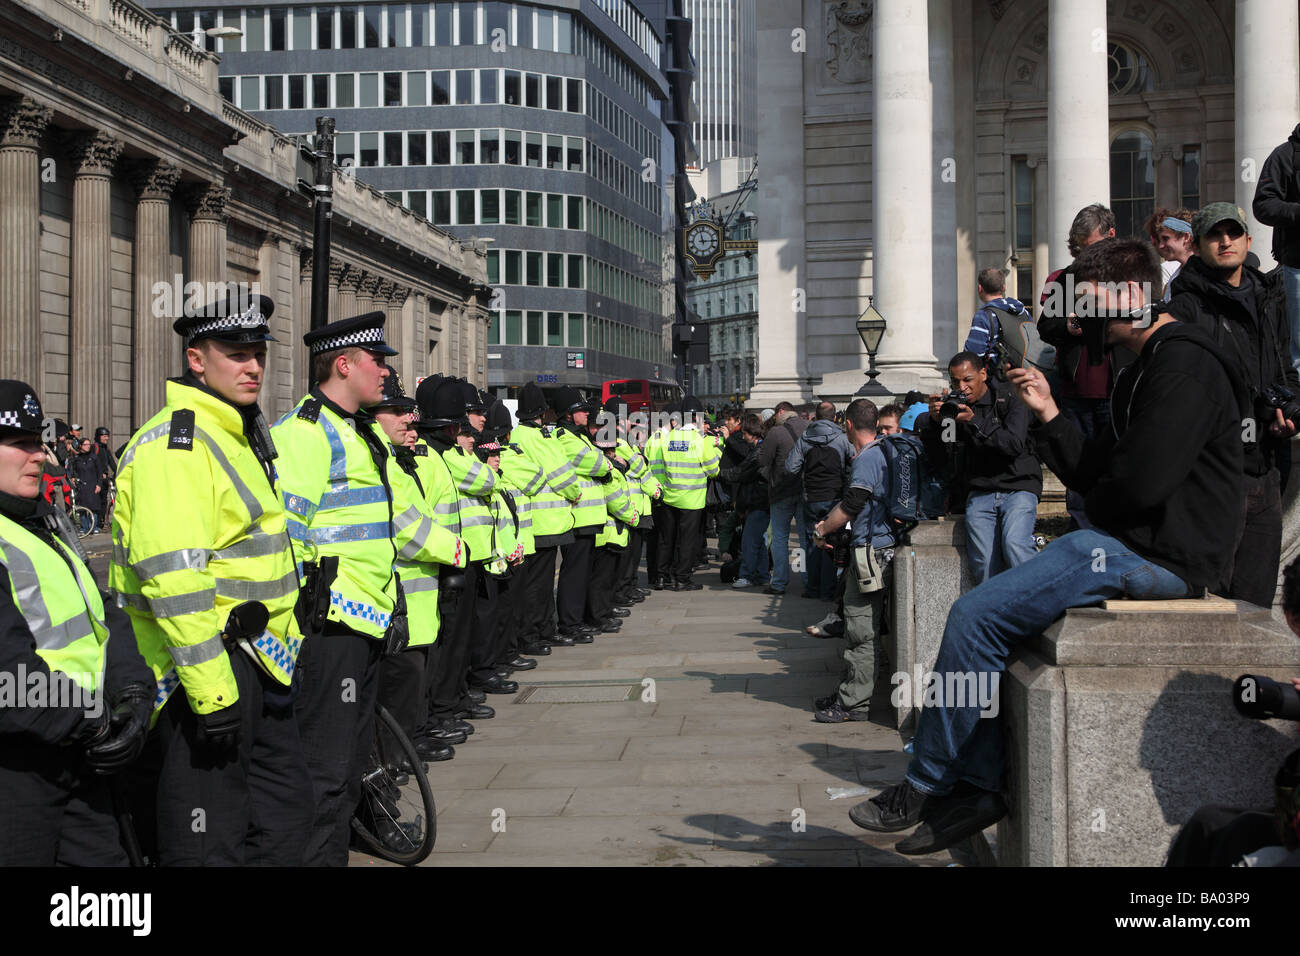 Protesters face police cordon outside the Bank of England during the 2009 G20 summit, London, UK. Stock Photo